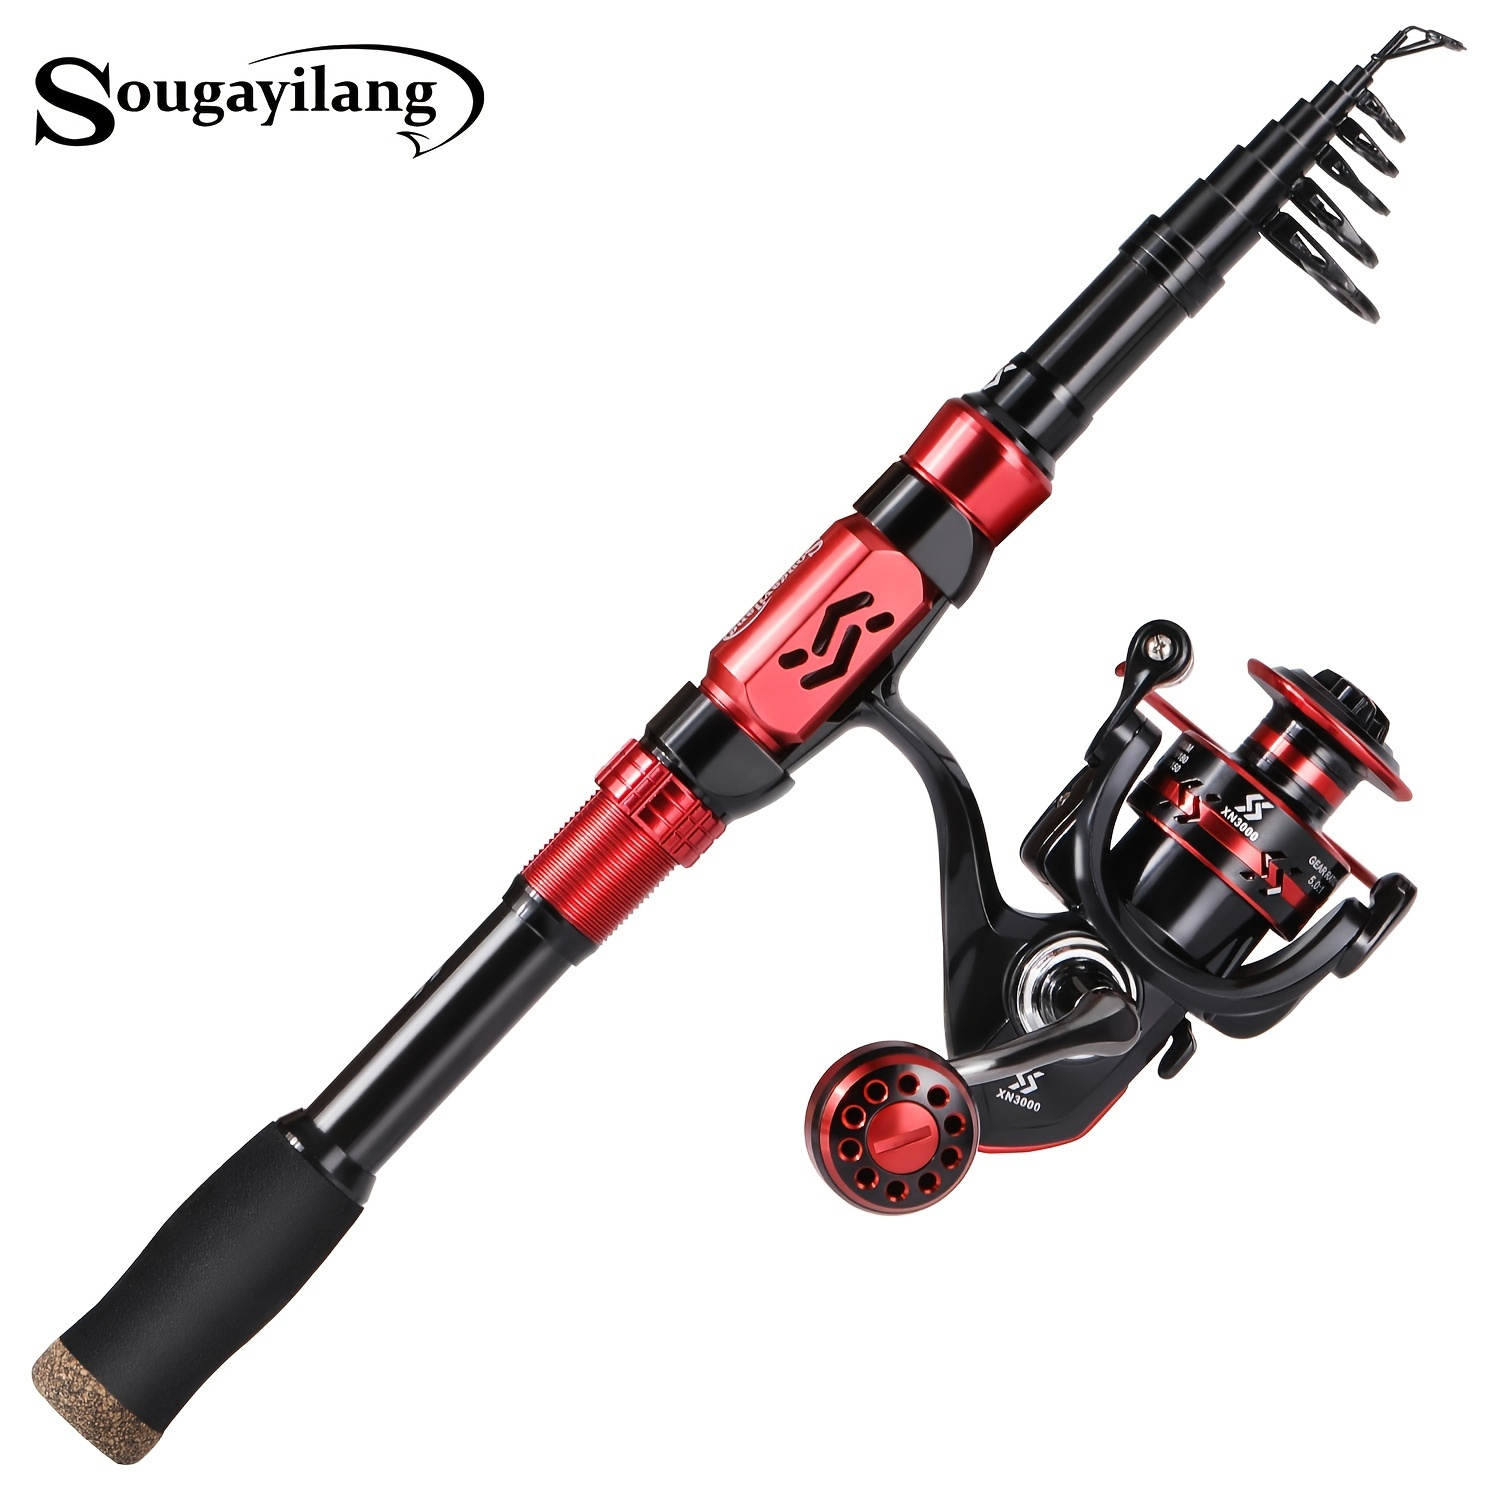 Sougayilang Baitcast Combo Telescopic Casting Fishing Rod and Colorful  Baitcaster Reel for Trout Carp Fishing